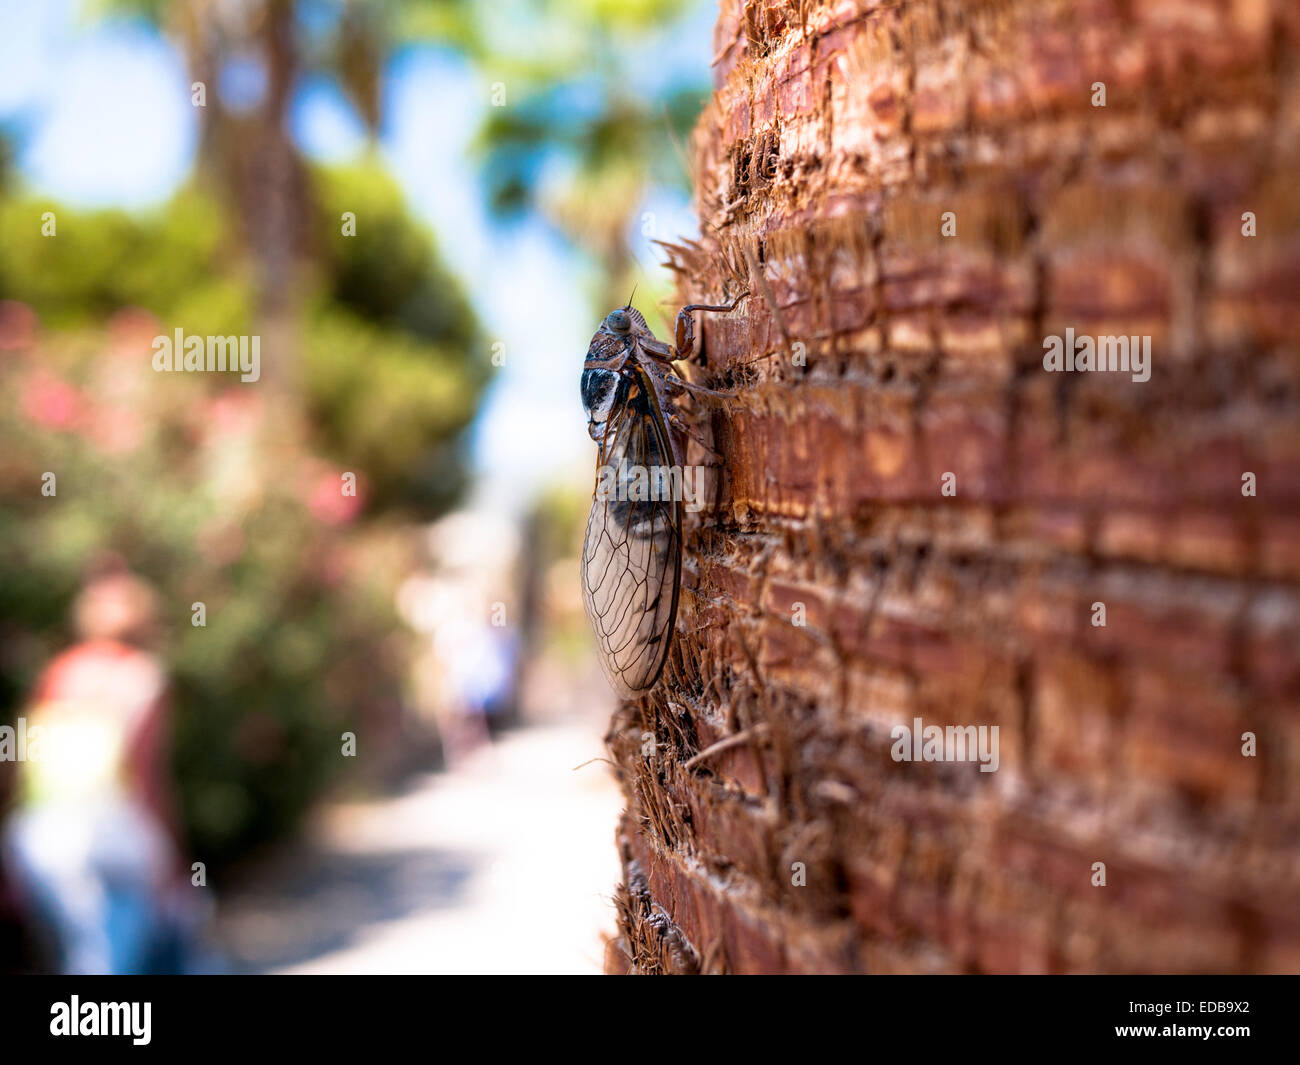 Macro view of cicada resting on the trunk of a palm tree. Alayna, Turkey. Stock Photo